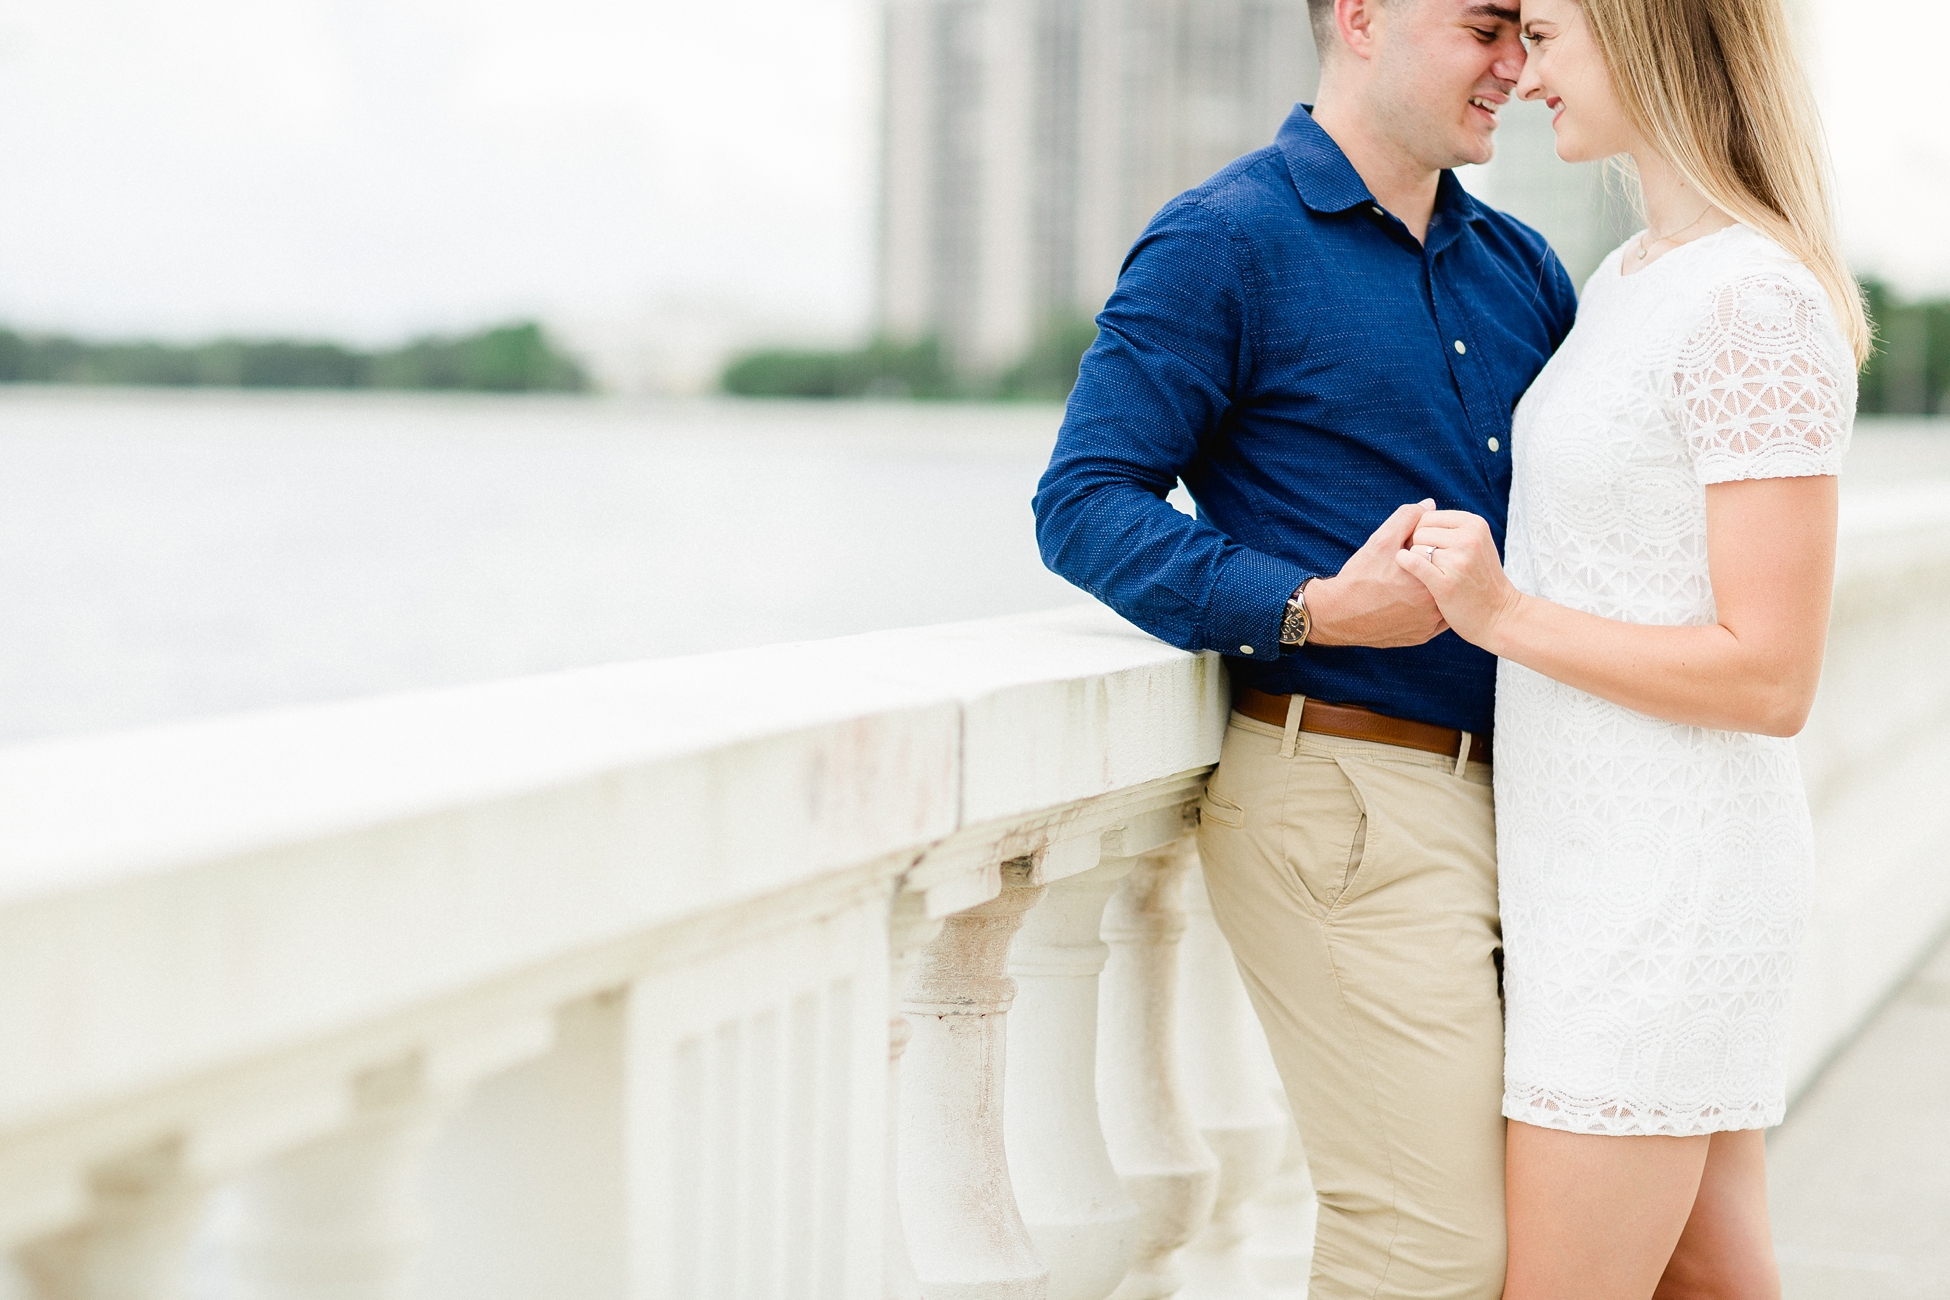 South Tampa Engagement | © Ailyn La Torre Photography 2018